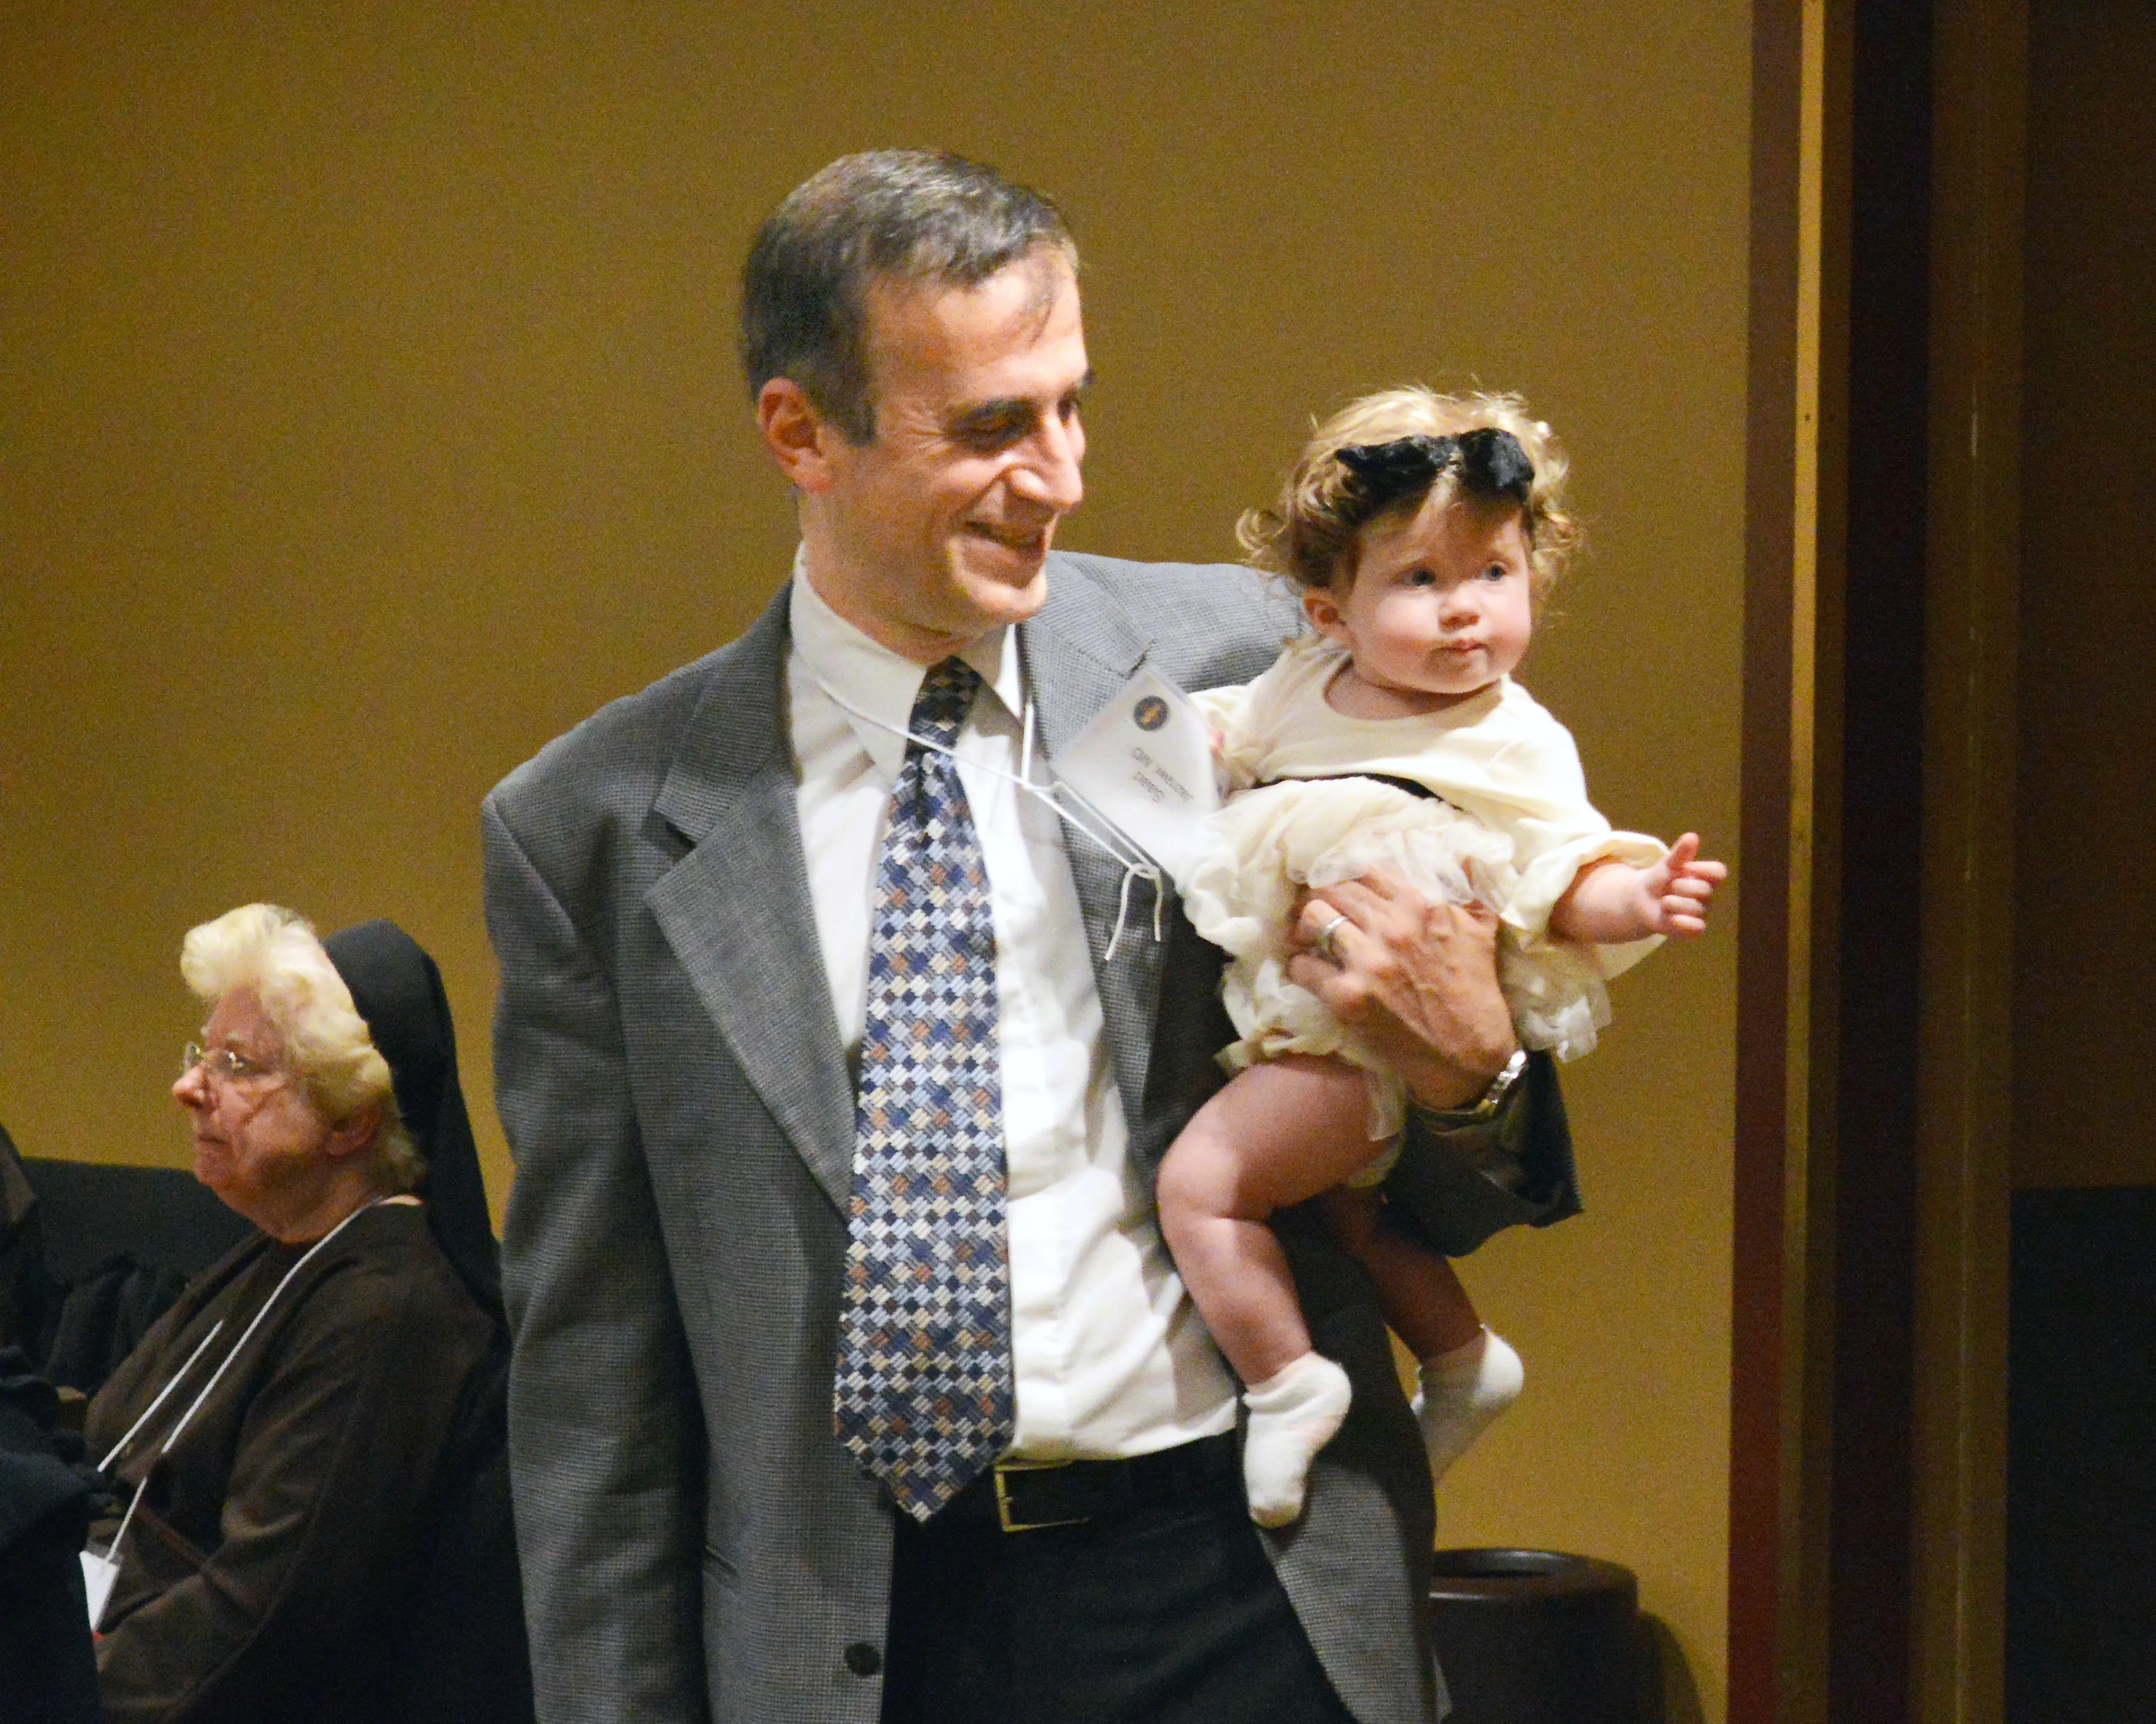 Dr. Saad Jazrawi, president of the Portland Catholic Physicians Guild, holds daughter Samar, age 7 months, during a dinner following the annual White Mass for Catholic health care workers in 2019. “If I combine my faith and my work, I’m a better Catholic and a better physician,” said Jazrawi.?w=200&h=150